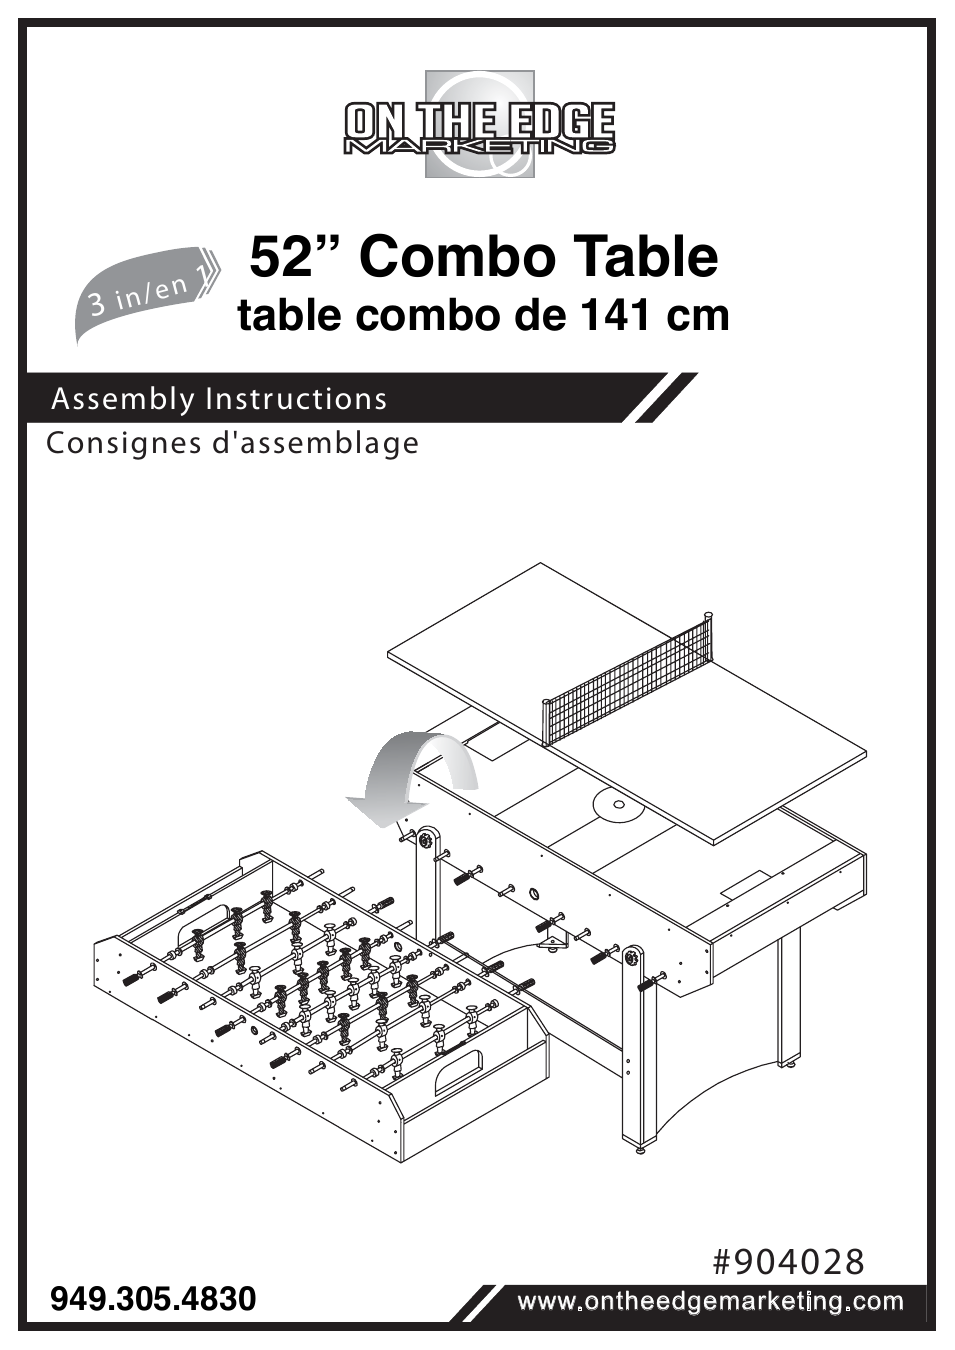 Combo Table #904028